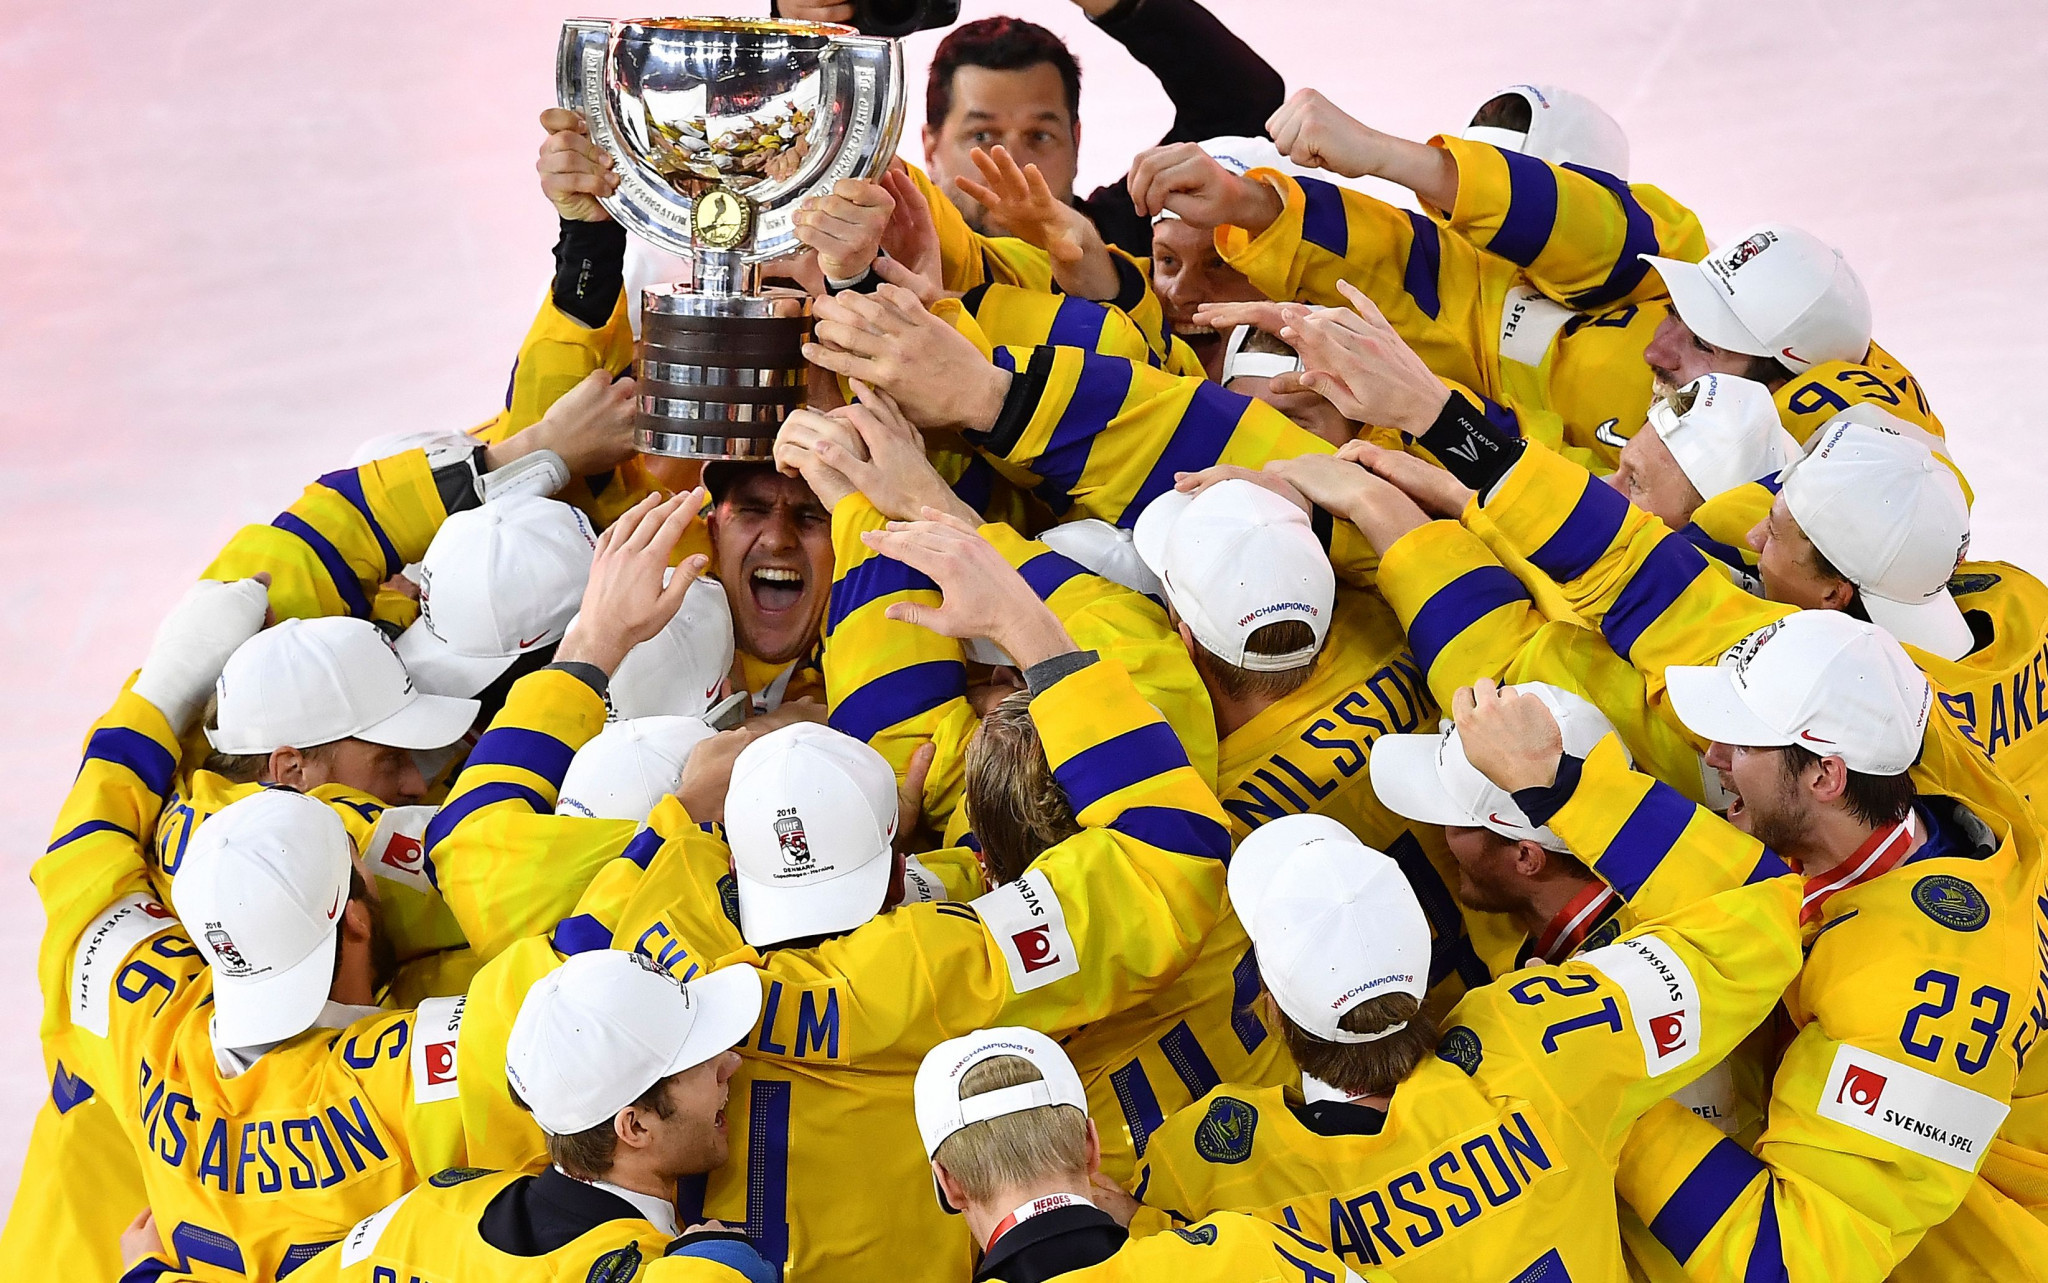 Sweden looking to retain title at IIHF World Championship in Slovakia